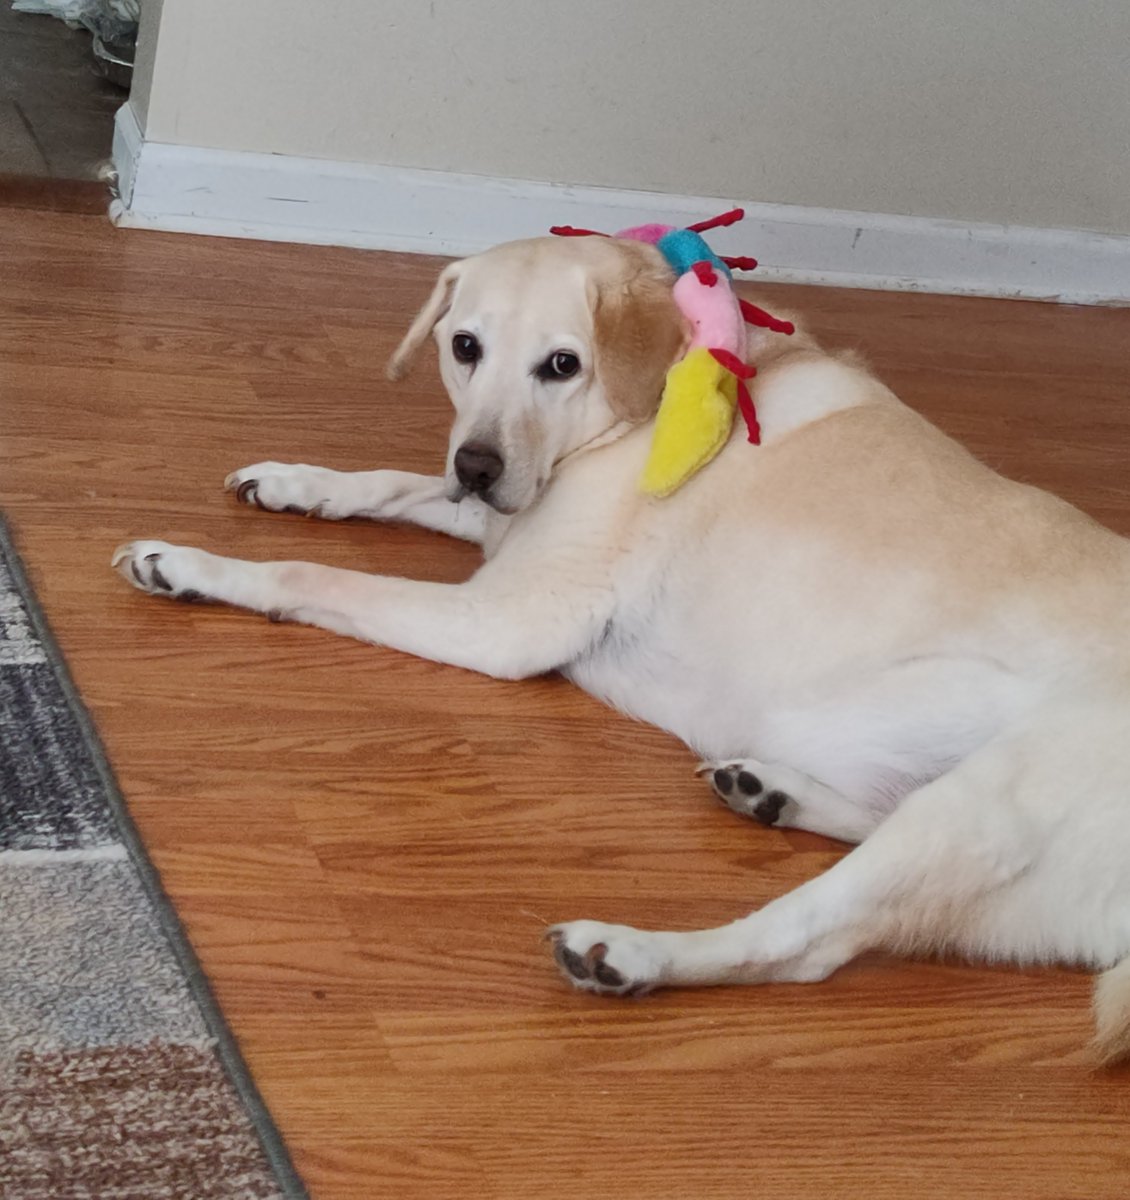 I put this toy on her. After 10 seconds she gave up trying to get it off and laid down. 🤣😂 #LazyLab #DogsofTwitter